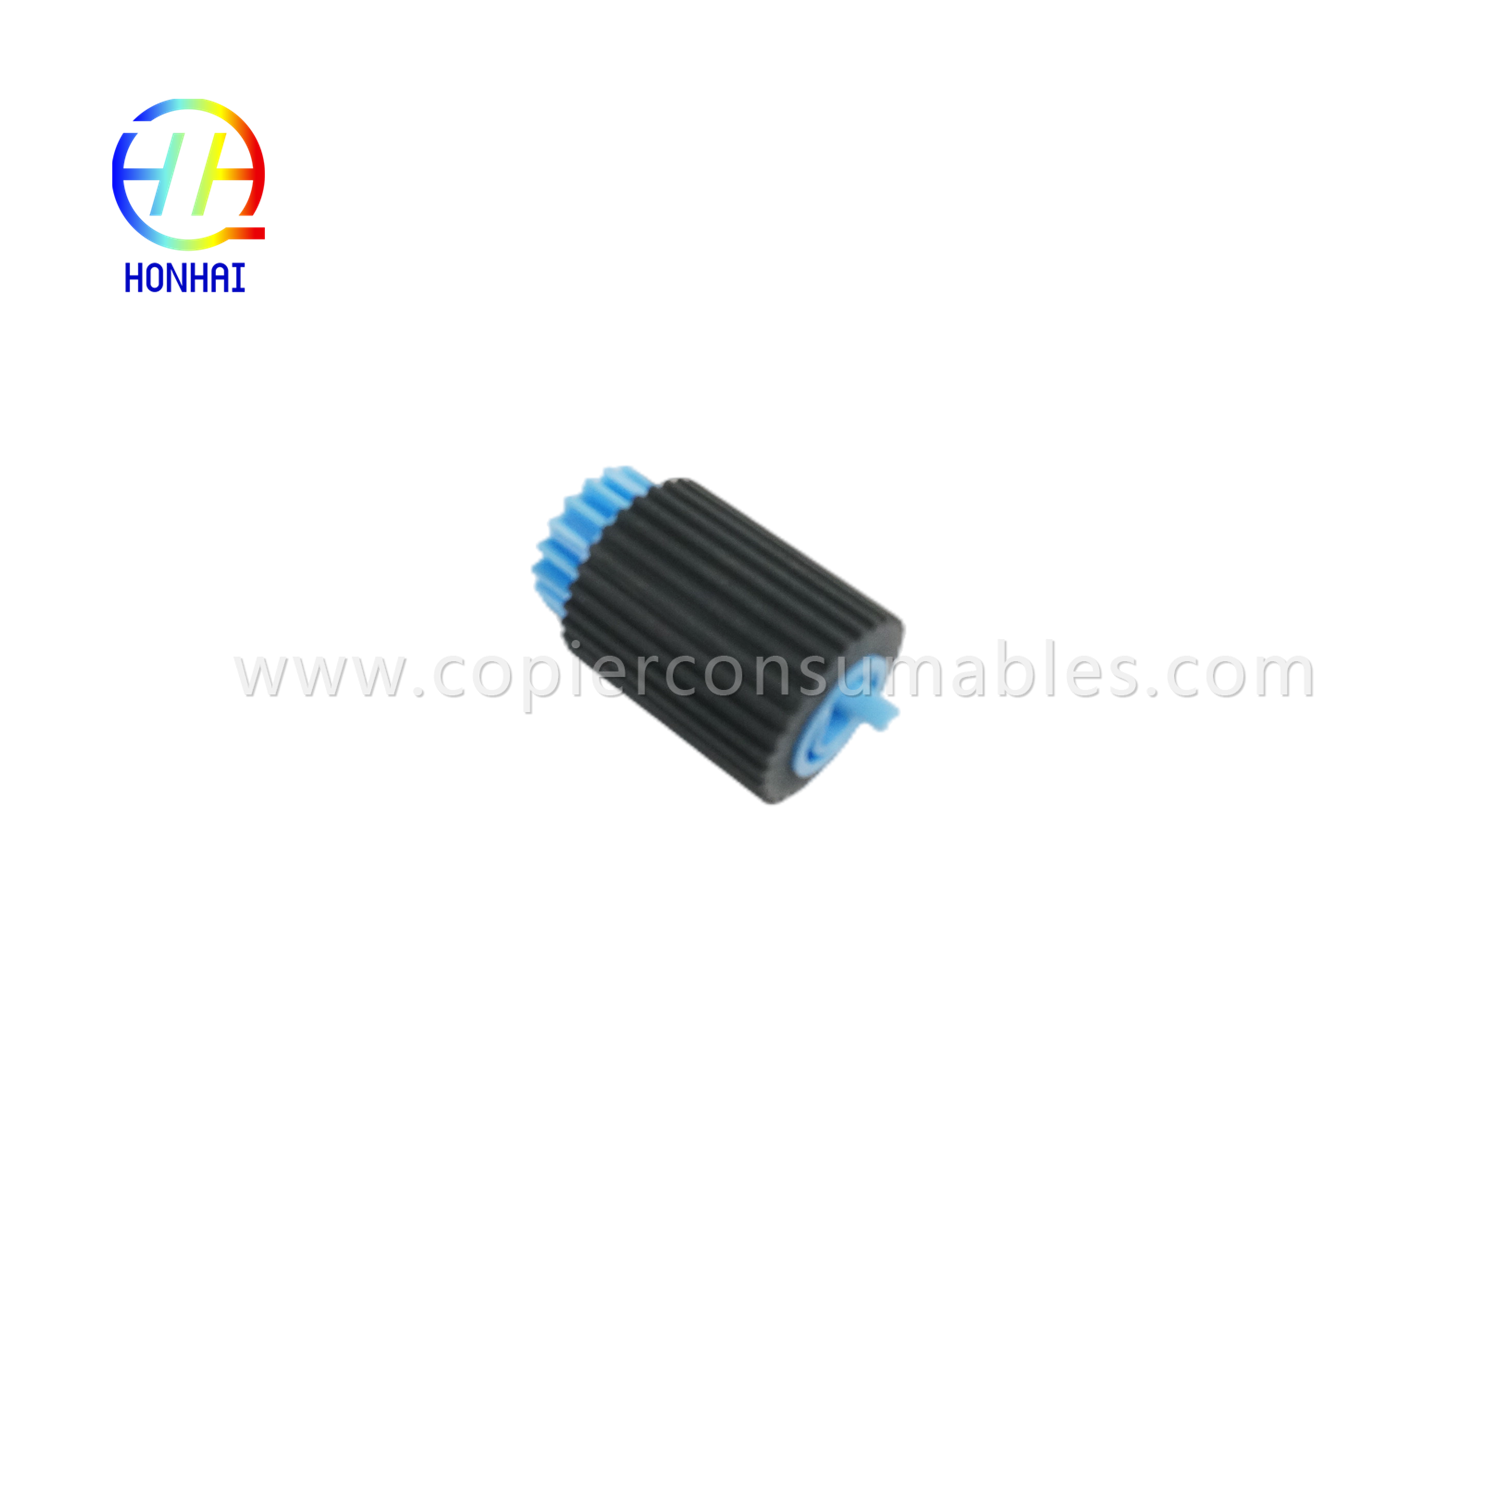 Lowest Price for Brother 8900 - Pickup Roller for Ricoh Aficio 2228C MP3500 4001 5000SP 3300SPF 8100DN 820DN – HONHAI